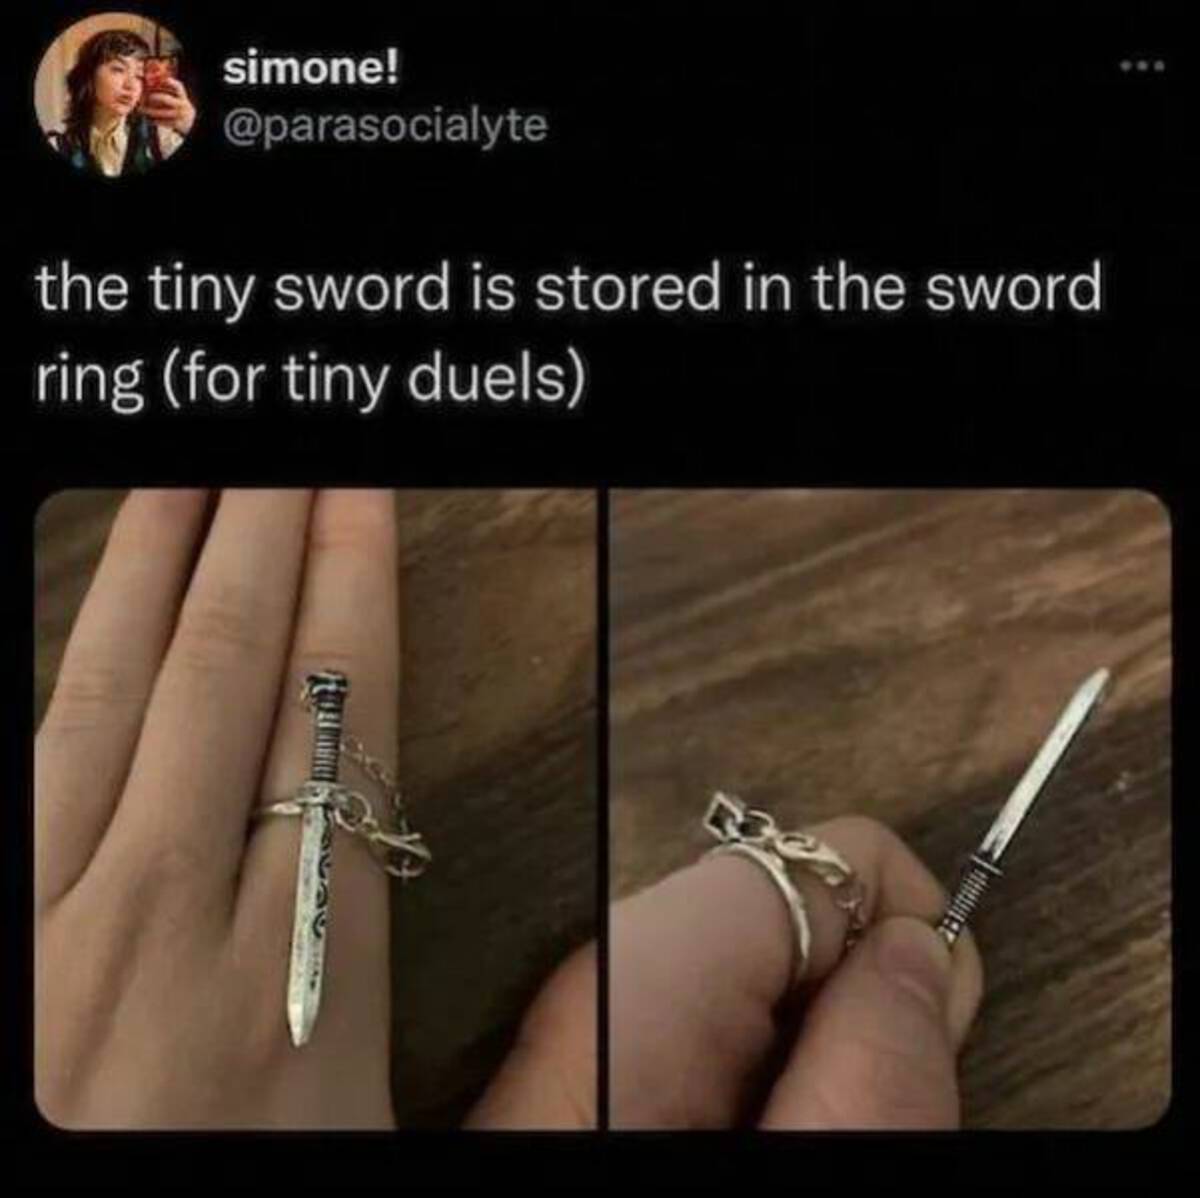 Sword - simone! the tiny sword is stored in the sword ring for tiny duels